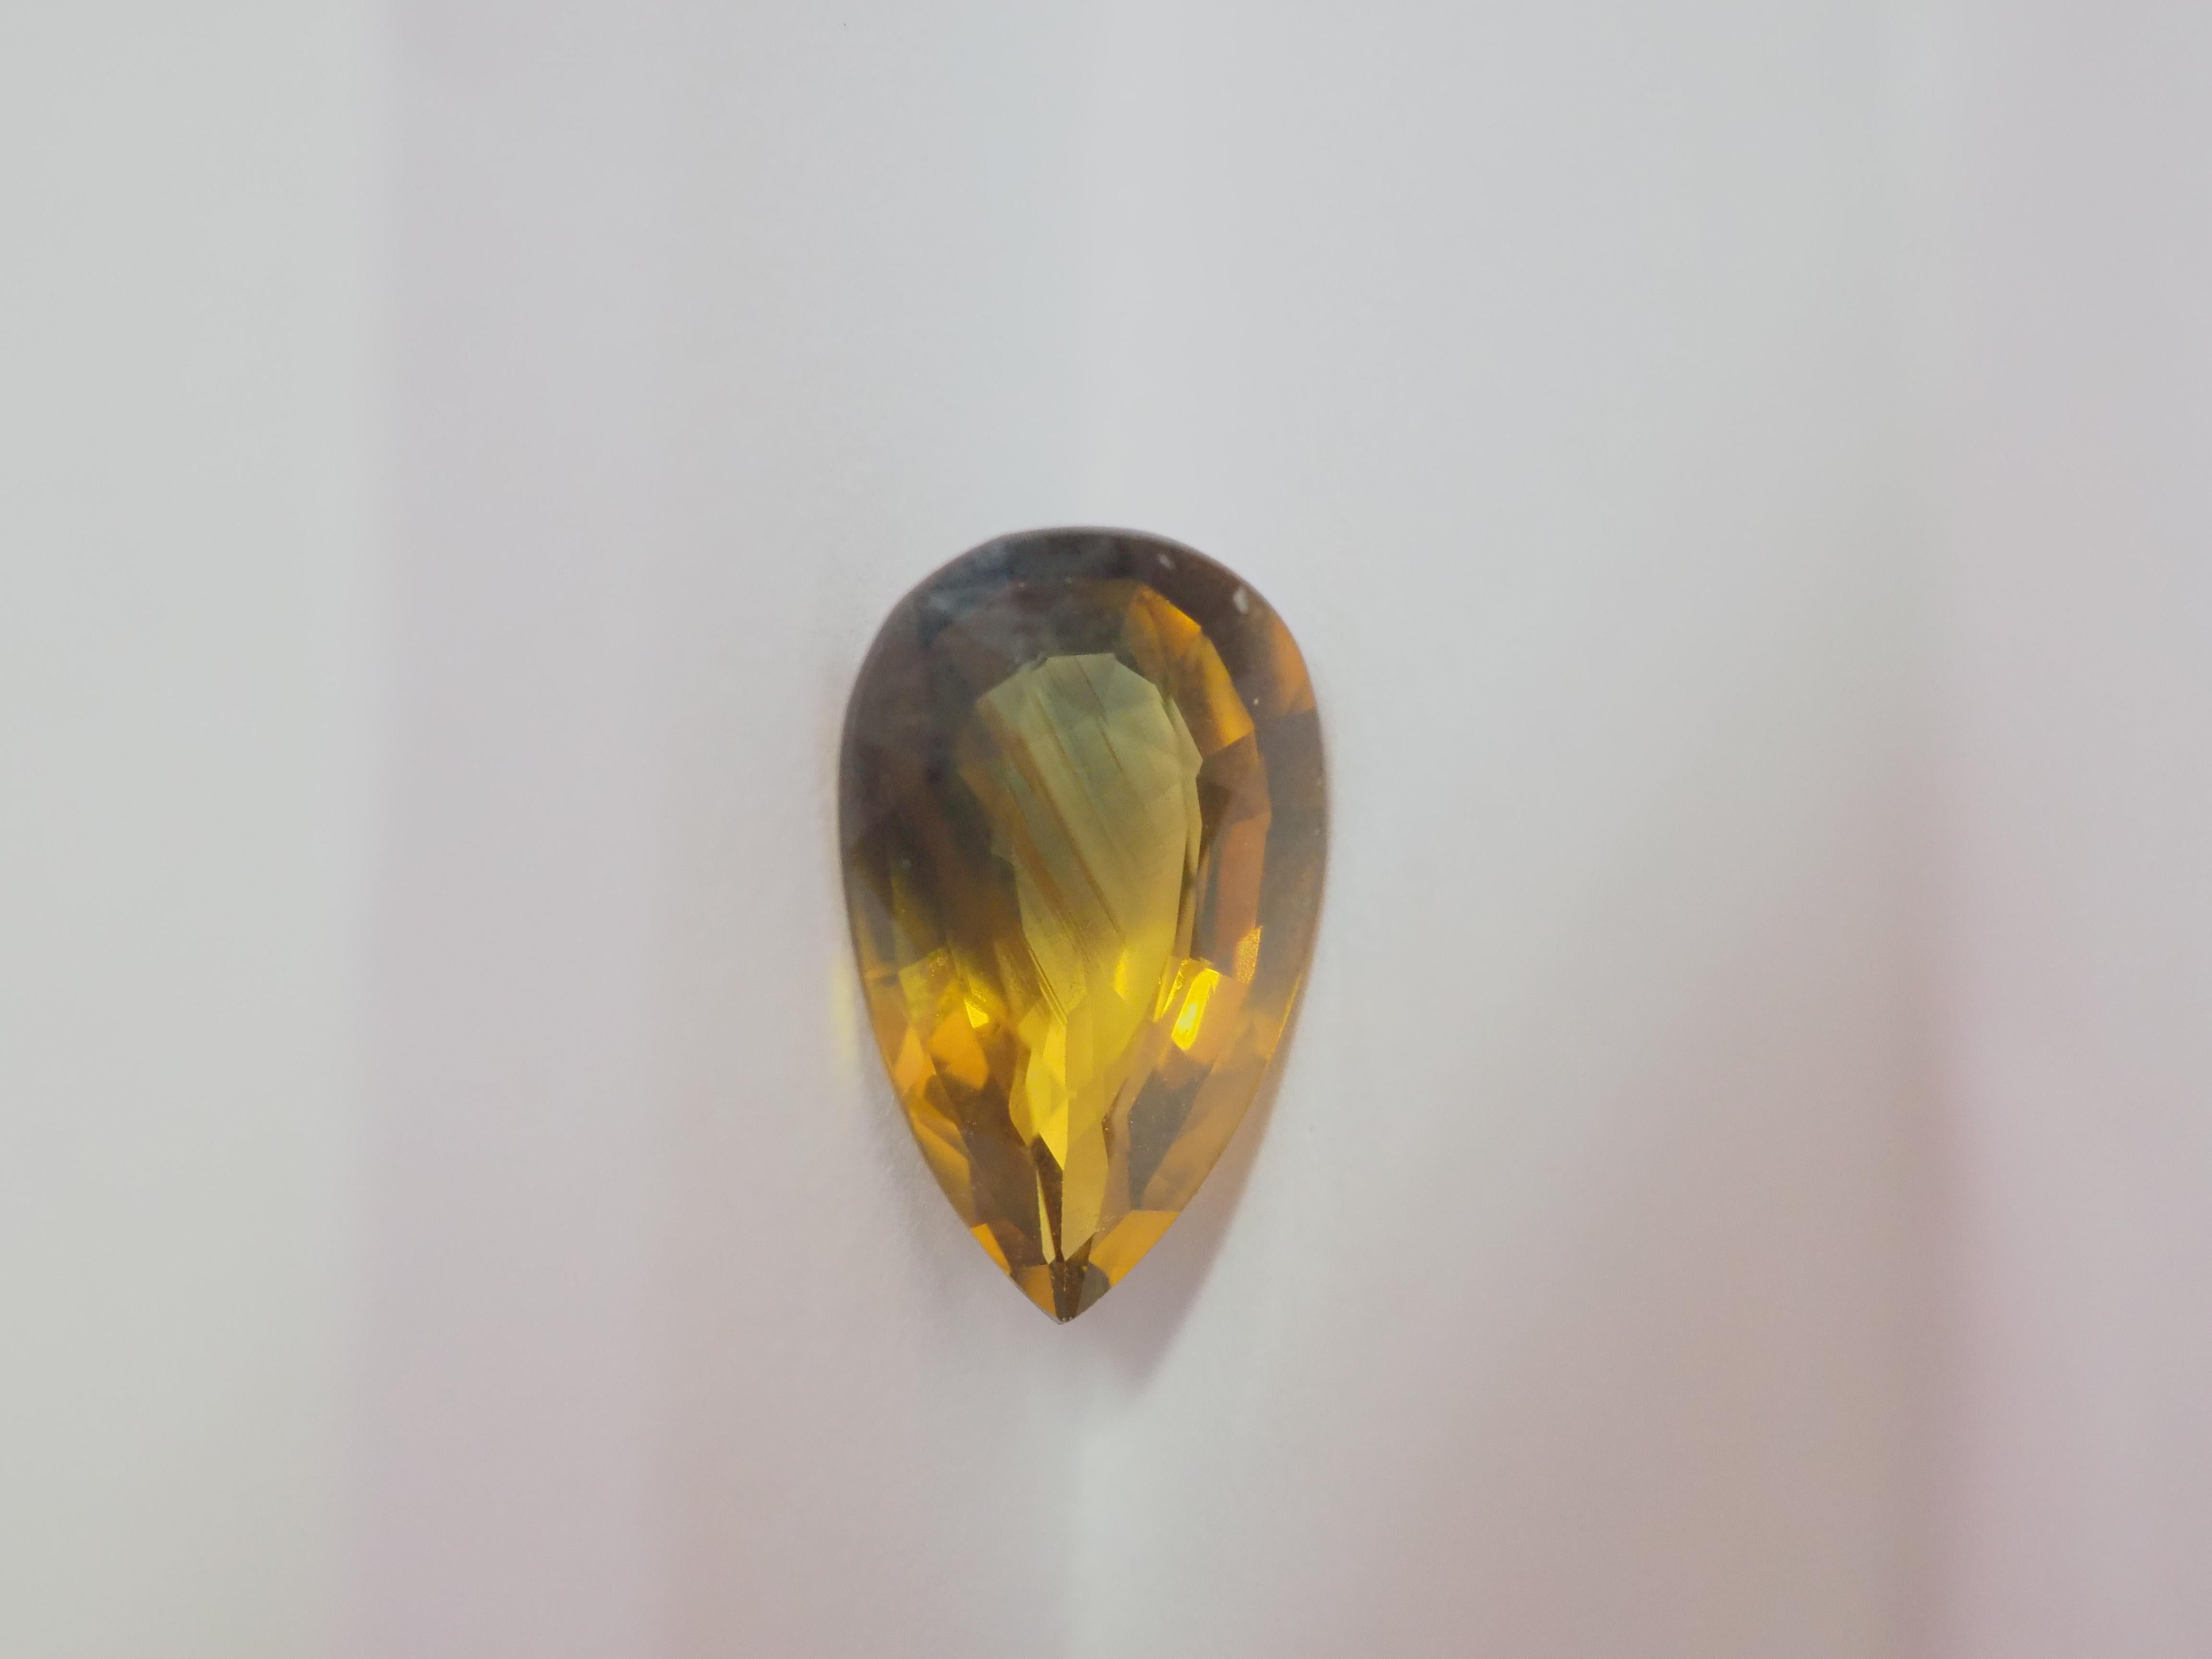 This particular gem measures approximately 11mm in height, 6mm in width, and 3.5mm in depth, providing ample space for intricate and creative jewelry designs. 

Bi-color pear cut greenish yellow sapphire.
Weight= 2.18 carats
treatment: no indication